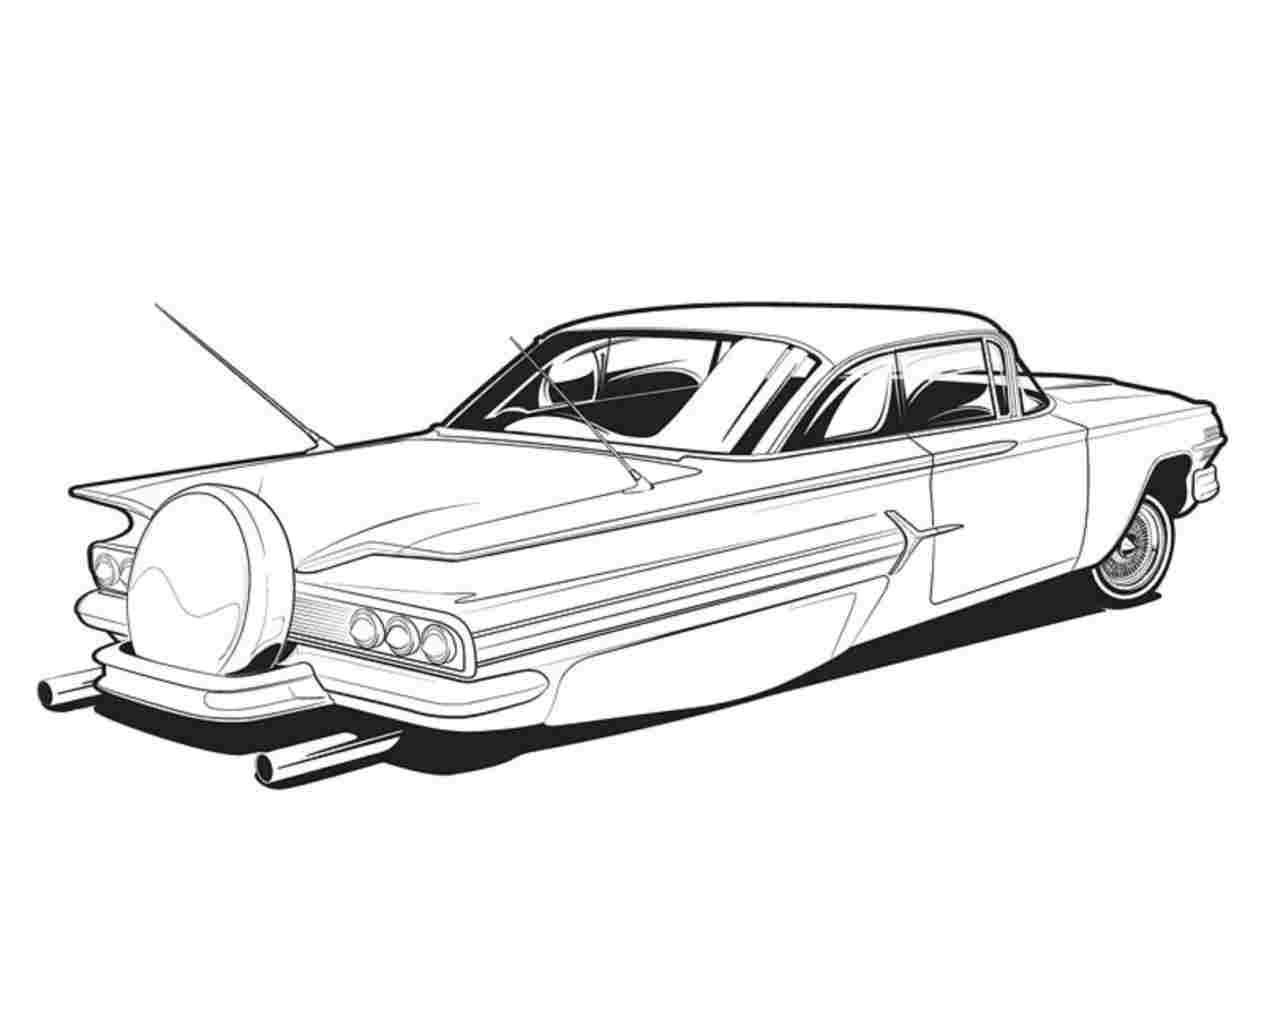 Lowrider Art Drawings Free Download On ClipArtMag